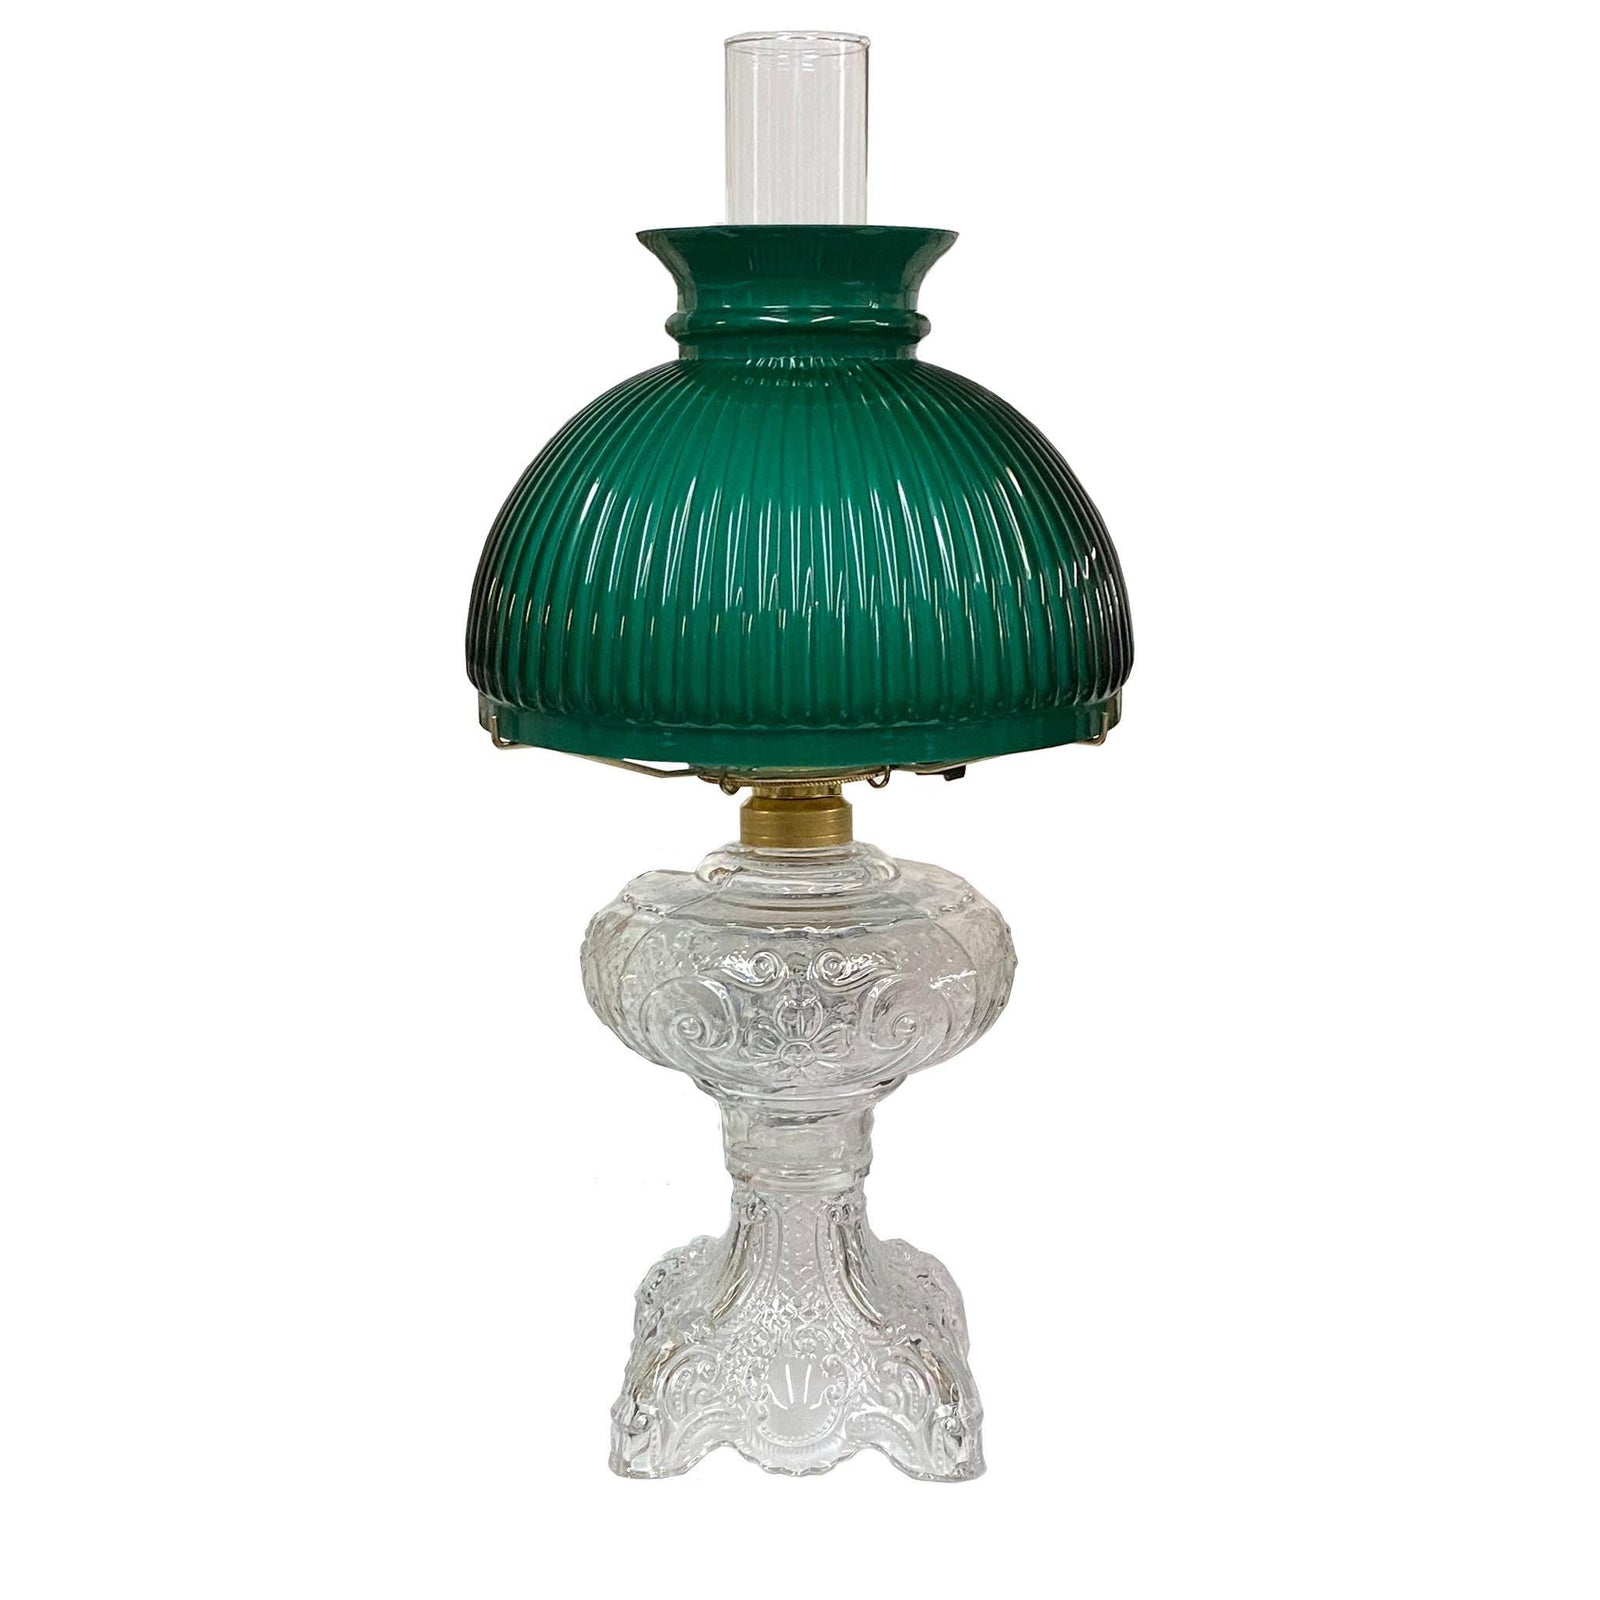 Antique Glass Lamp, Green Student Shade - paxton hardware ltd